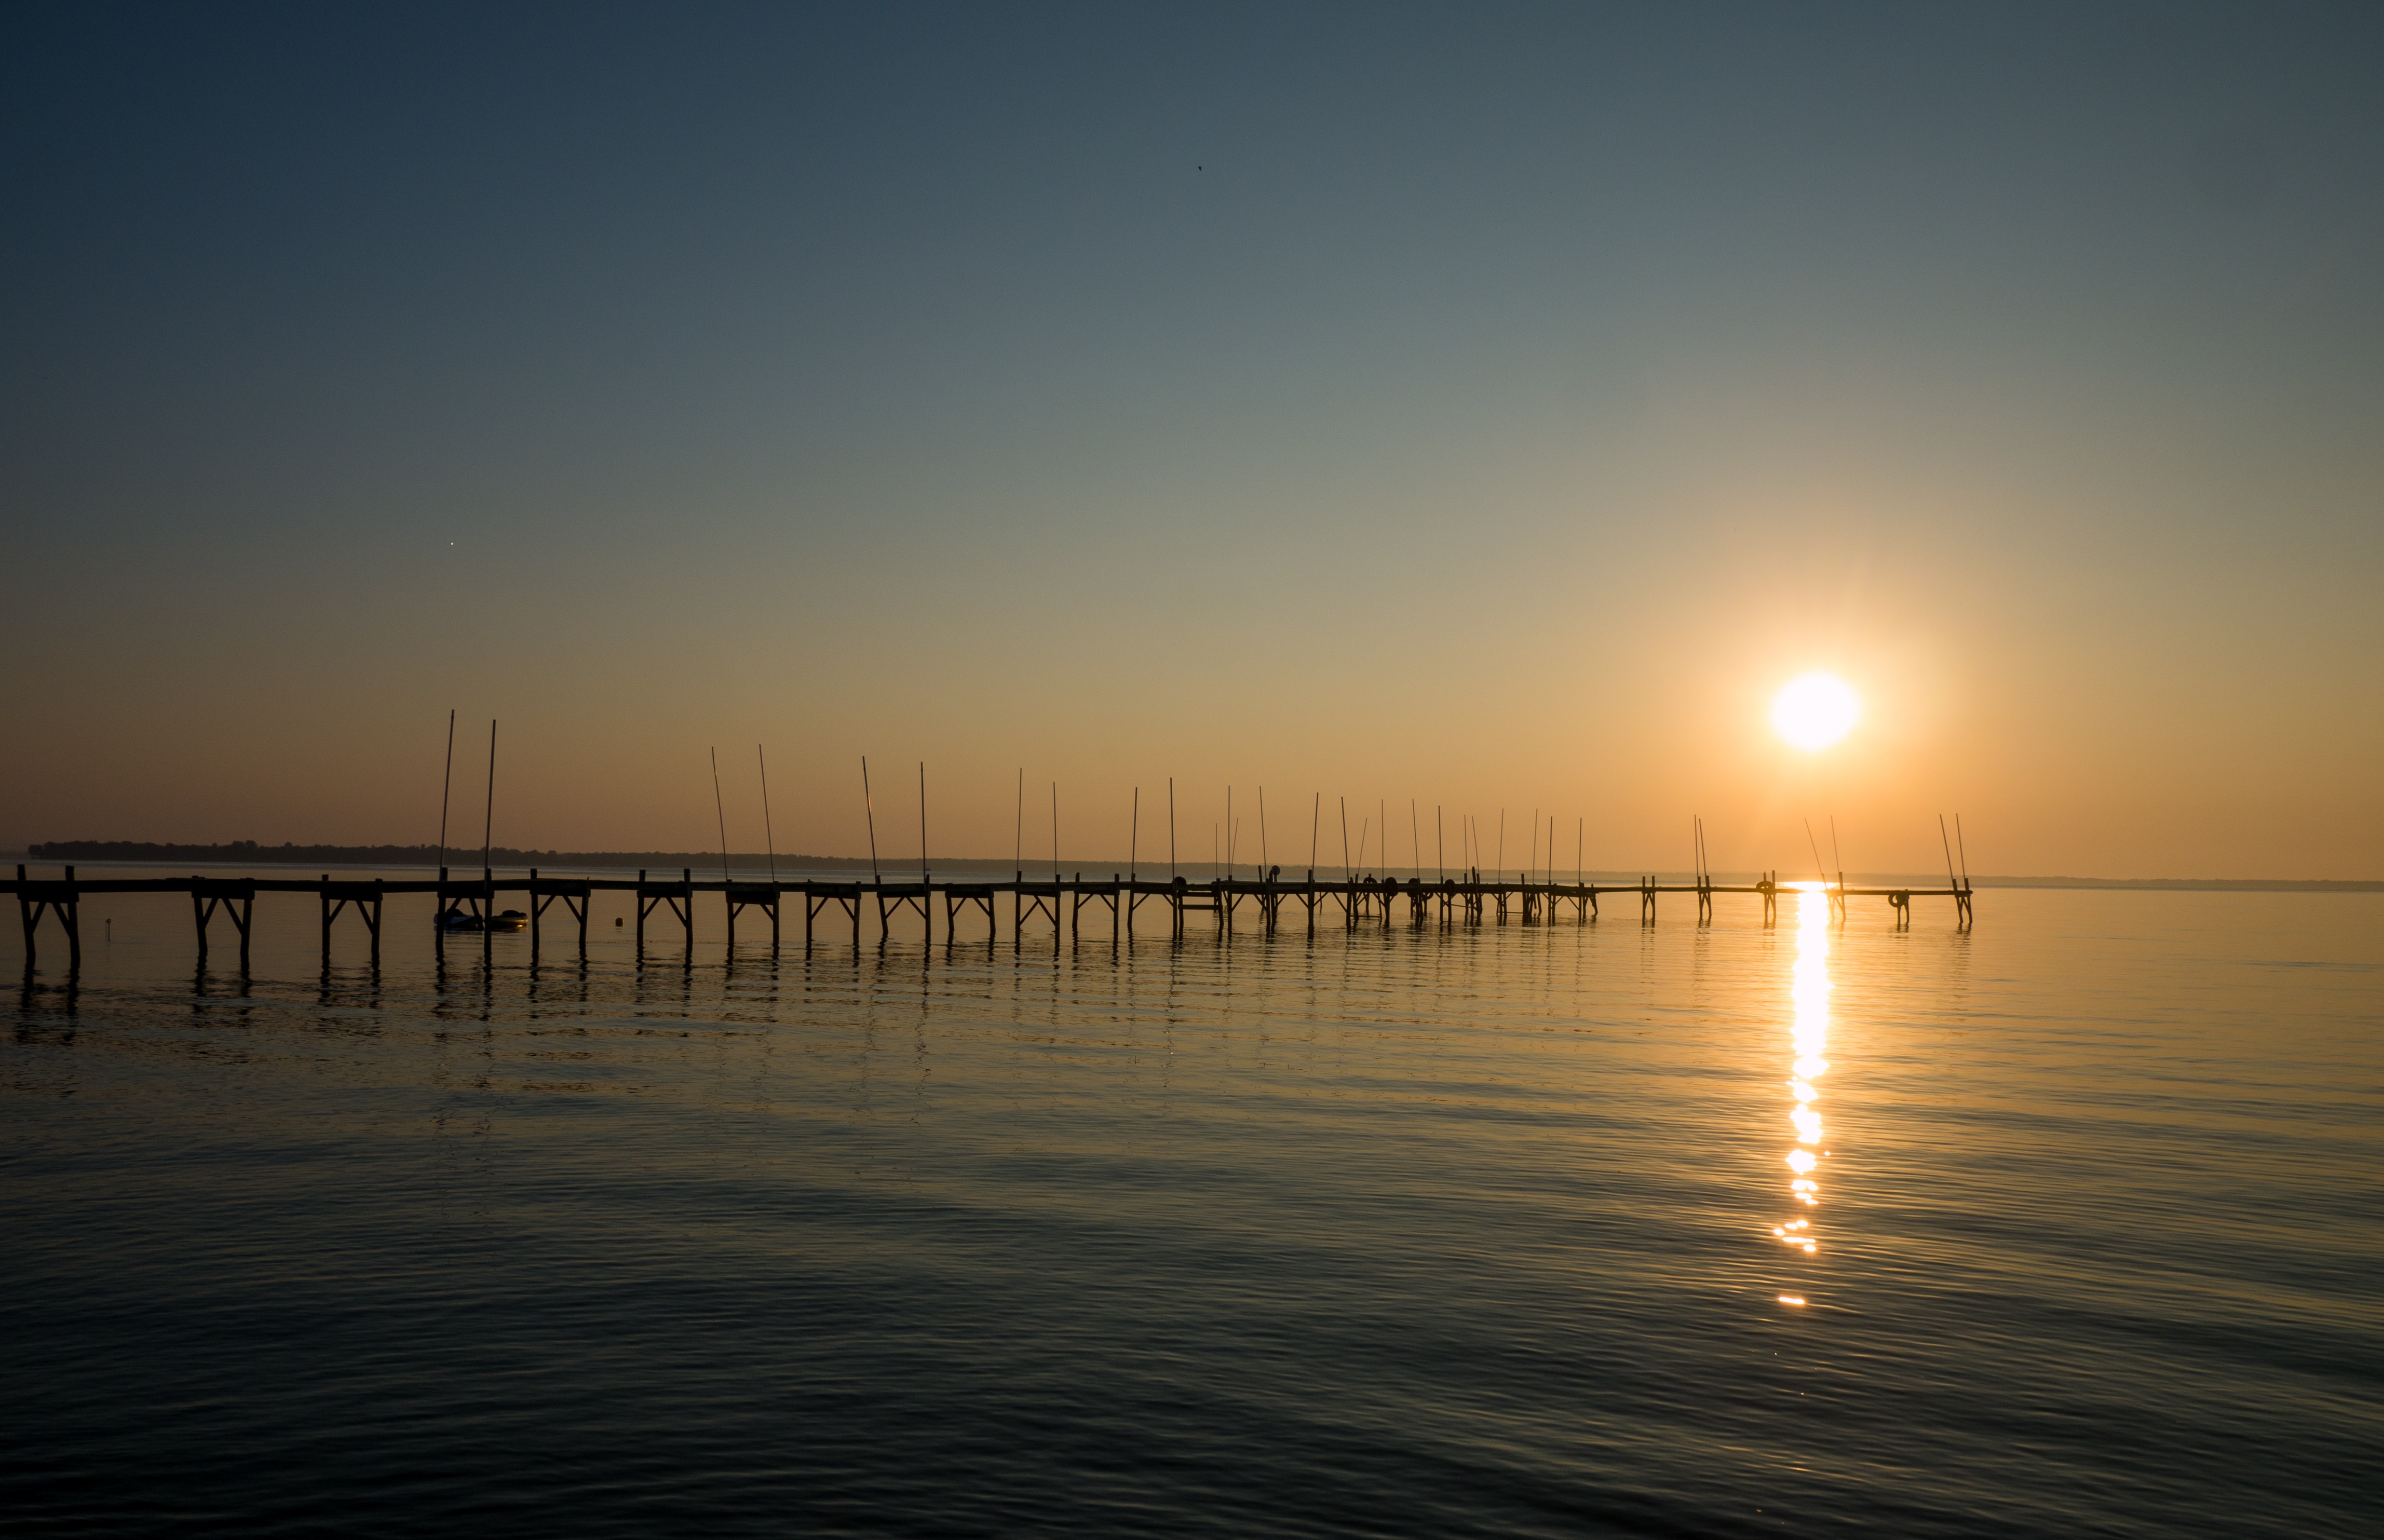 Wallpaper Weekends: Sittin' on the Dock of the Bay for iOS, Mac ...